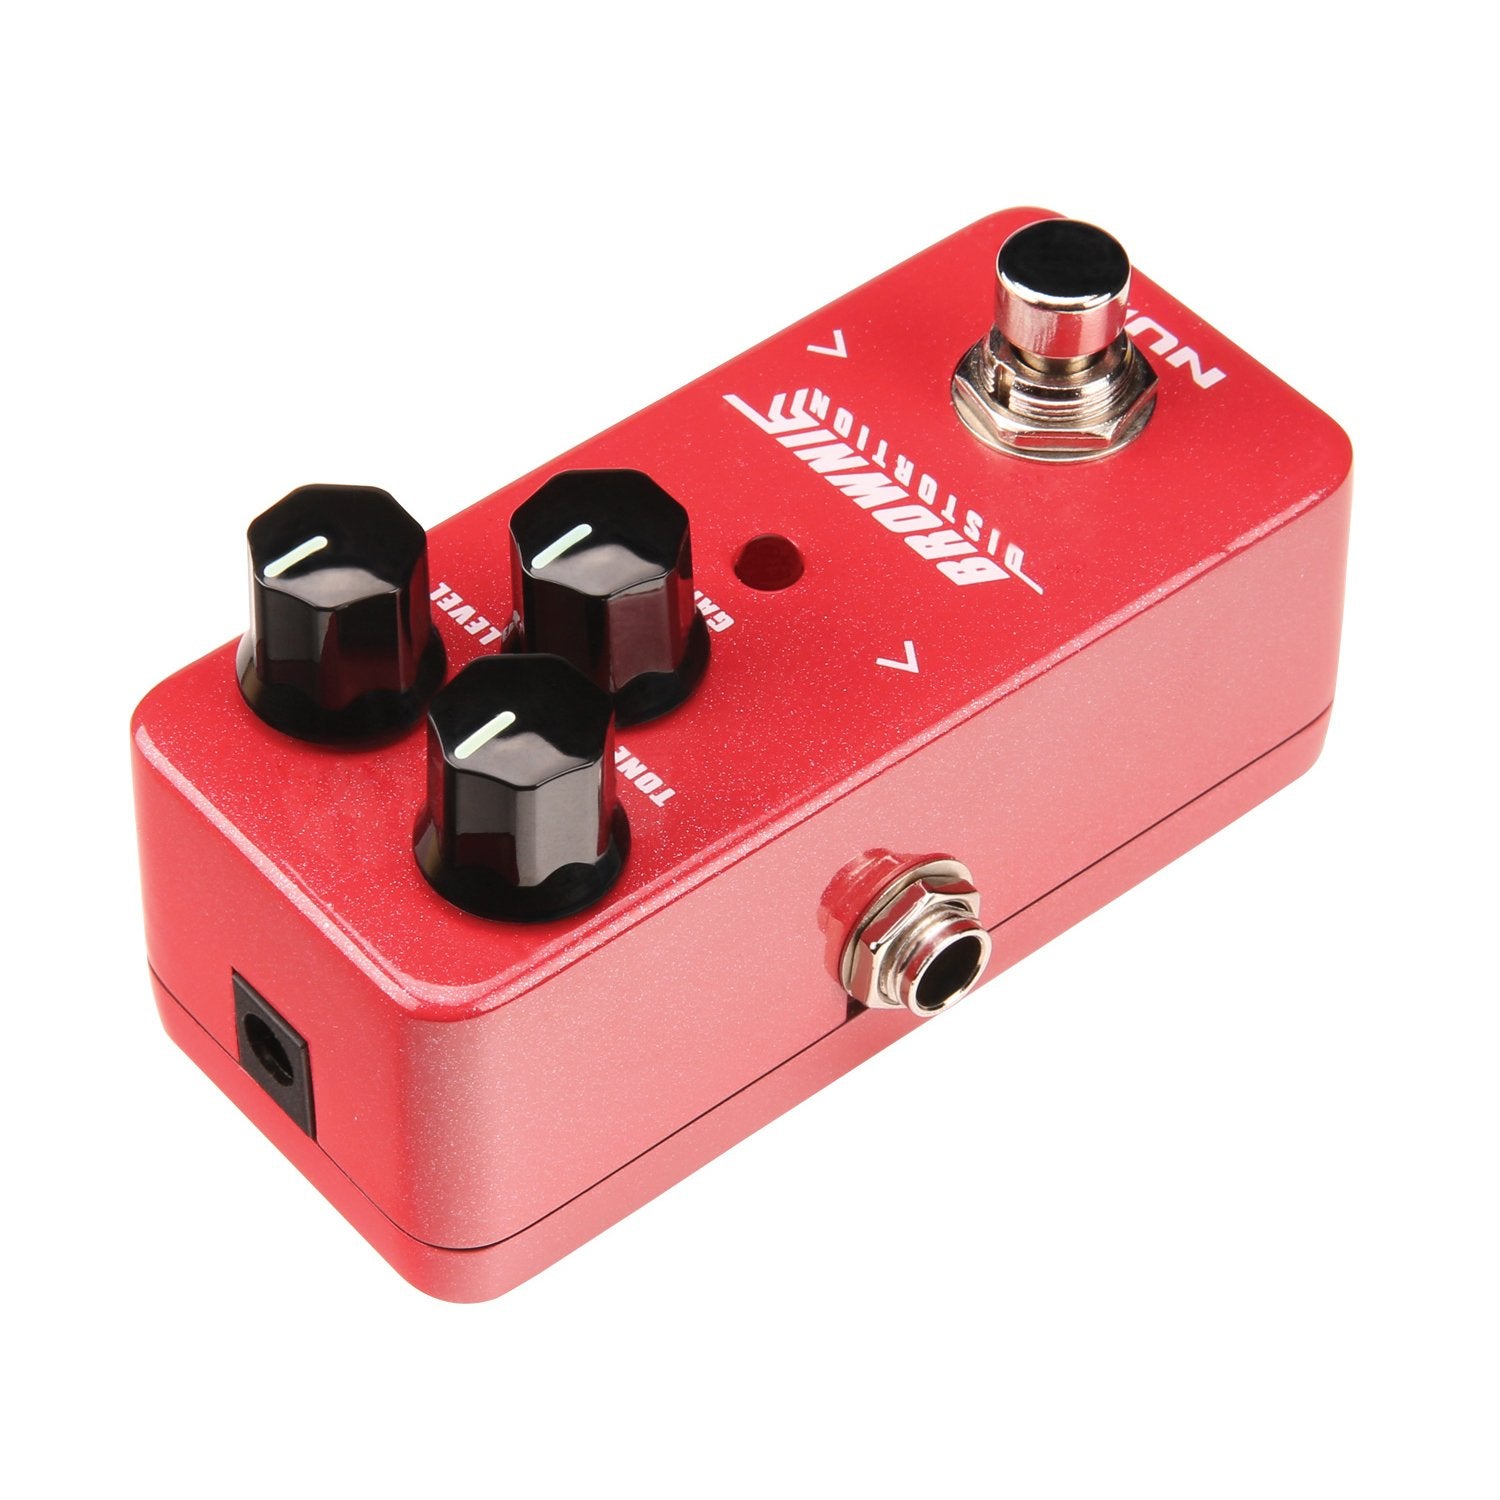 NUX Brownie Distortion Pedal - DY Pro Audio